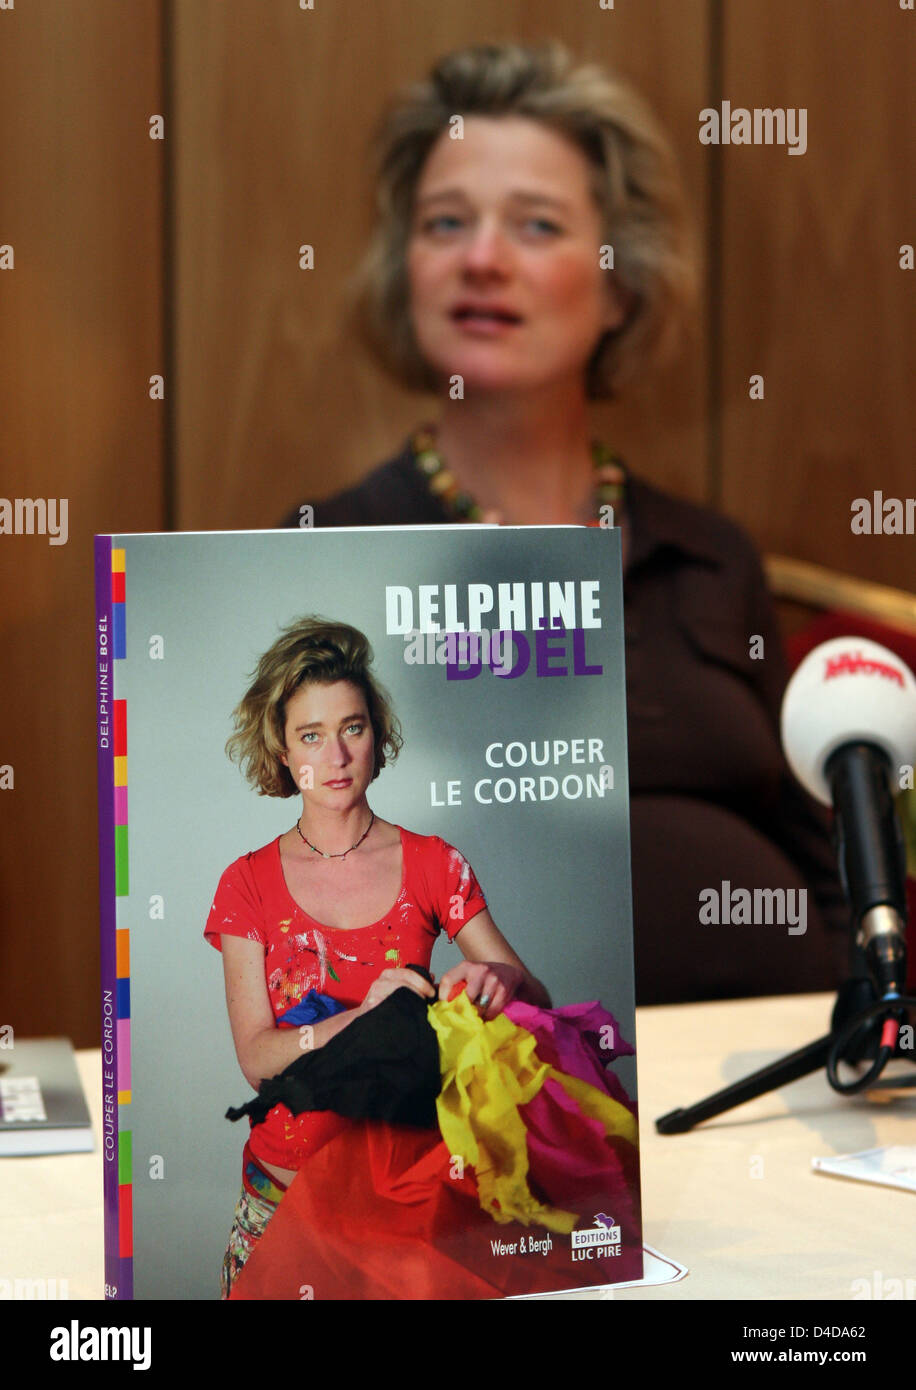 Delphine Boel is pictured during the presentation of her book 'De navelstreng doorknippen' ('To cut the umbilical cord') in Bruxelles, Belgium, 09 April 2008. She claims to be the daughter of Albert II of Belgium and Sybille, Baroness de Selys Longchamps. Although King Albert does not acknowledge her as his daughter, Boel's paternity link with the King is often reported as a fact b Stock Photo